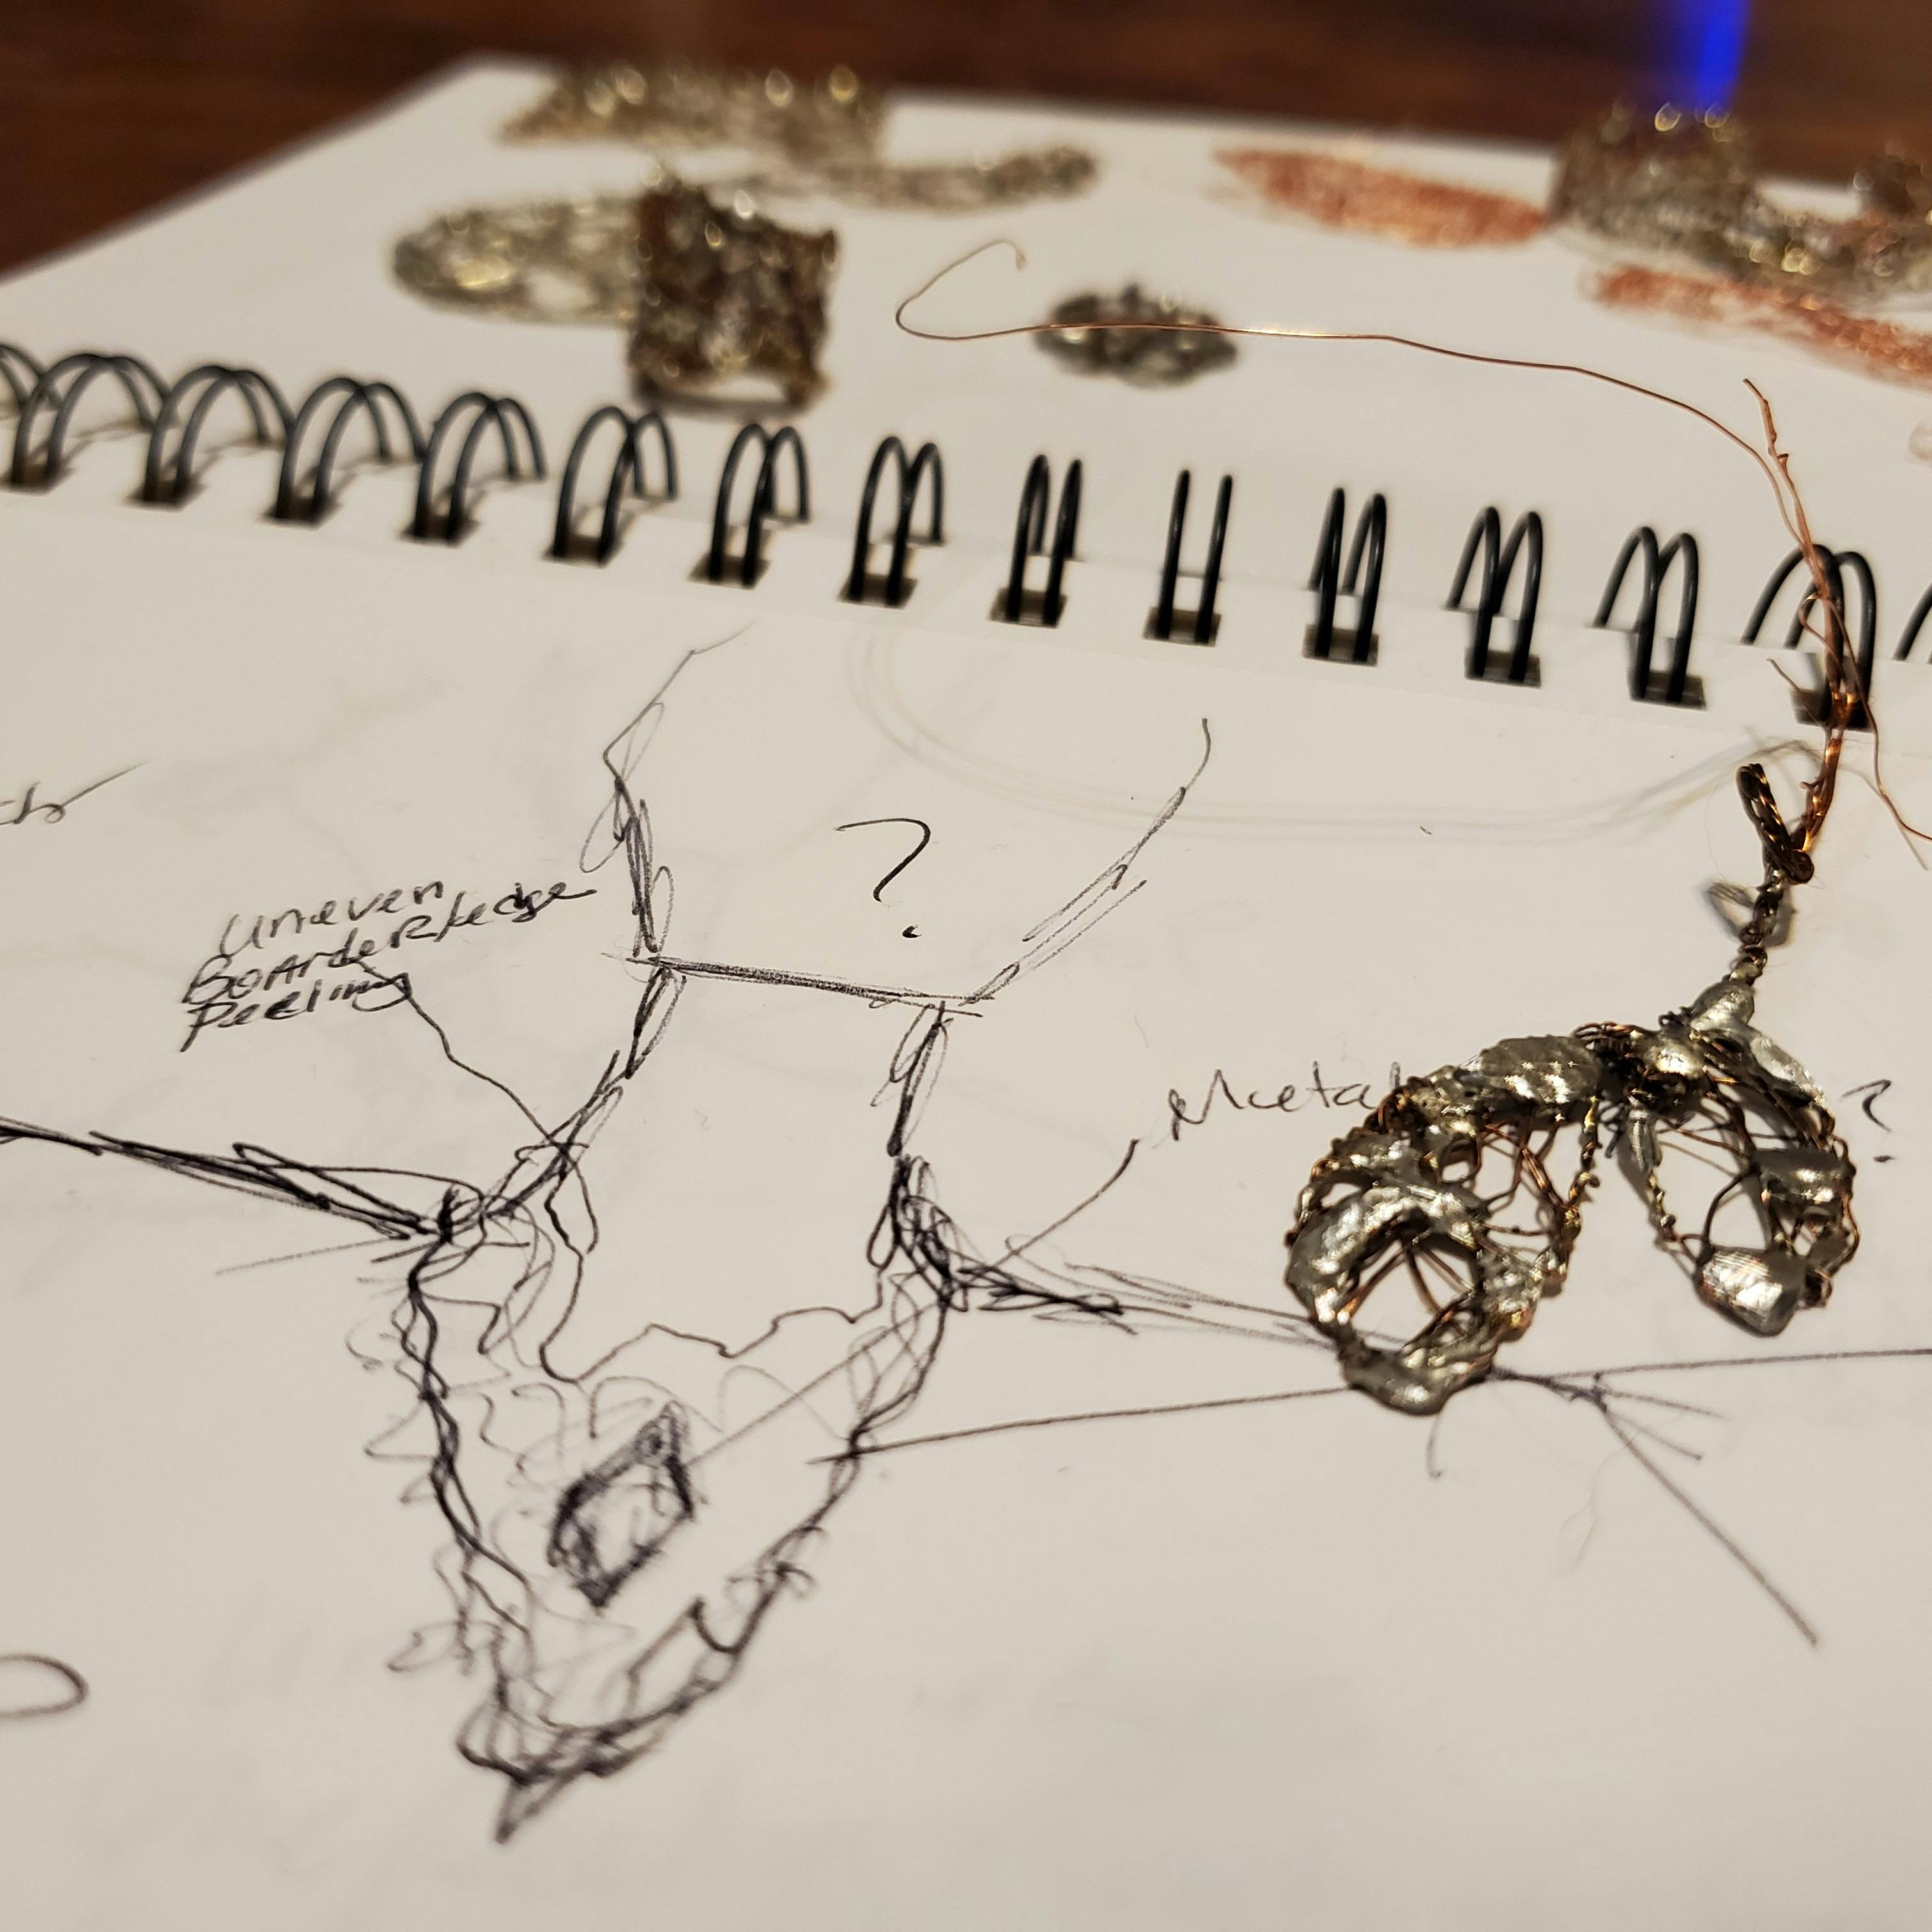 notepad with sketch of jewelry art concept